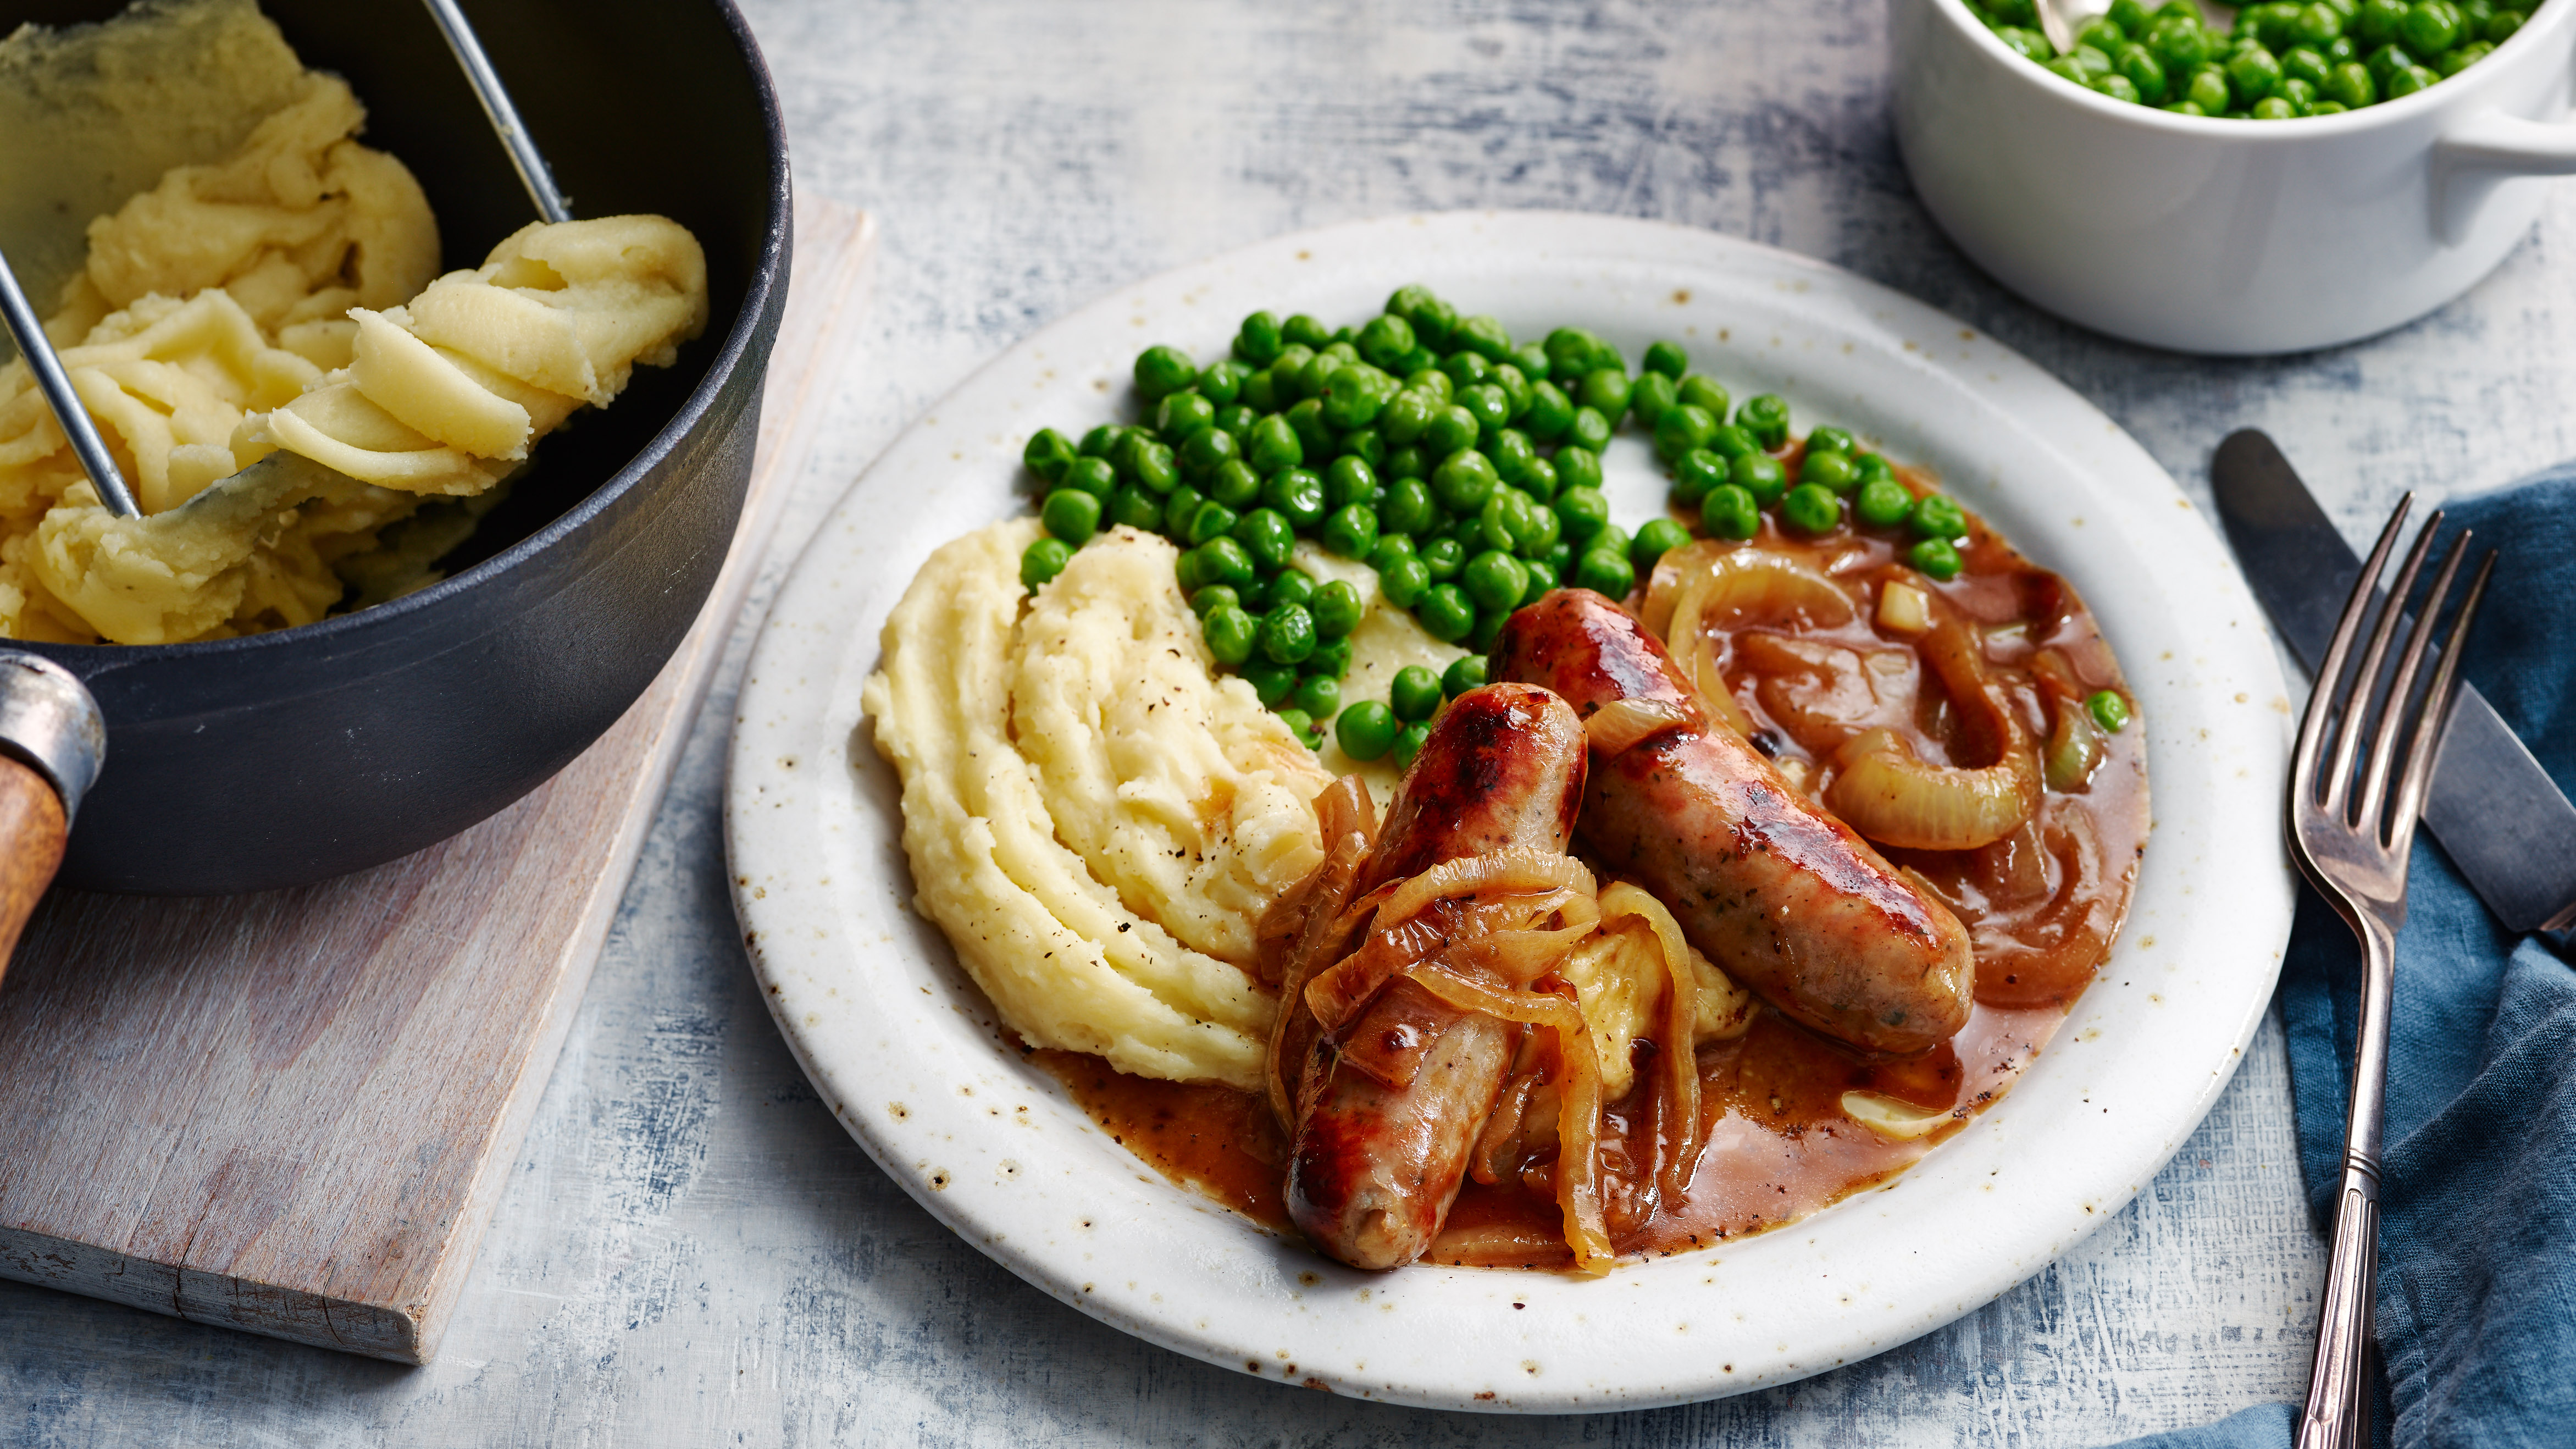 Bangers and Mash (Sausage with Onion Gravy)